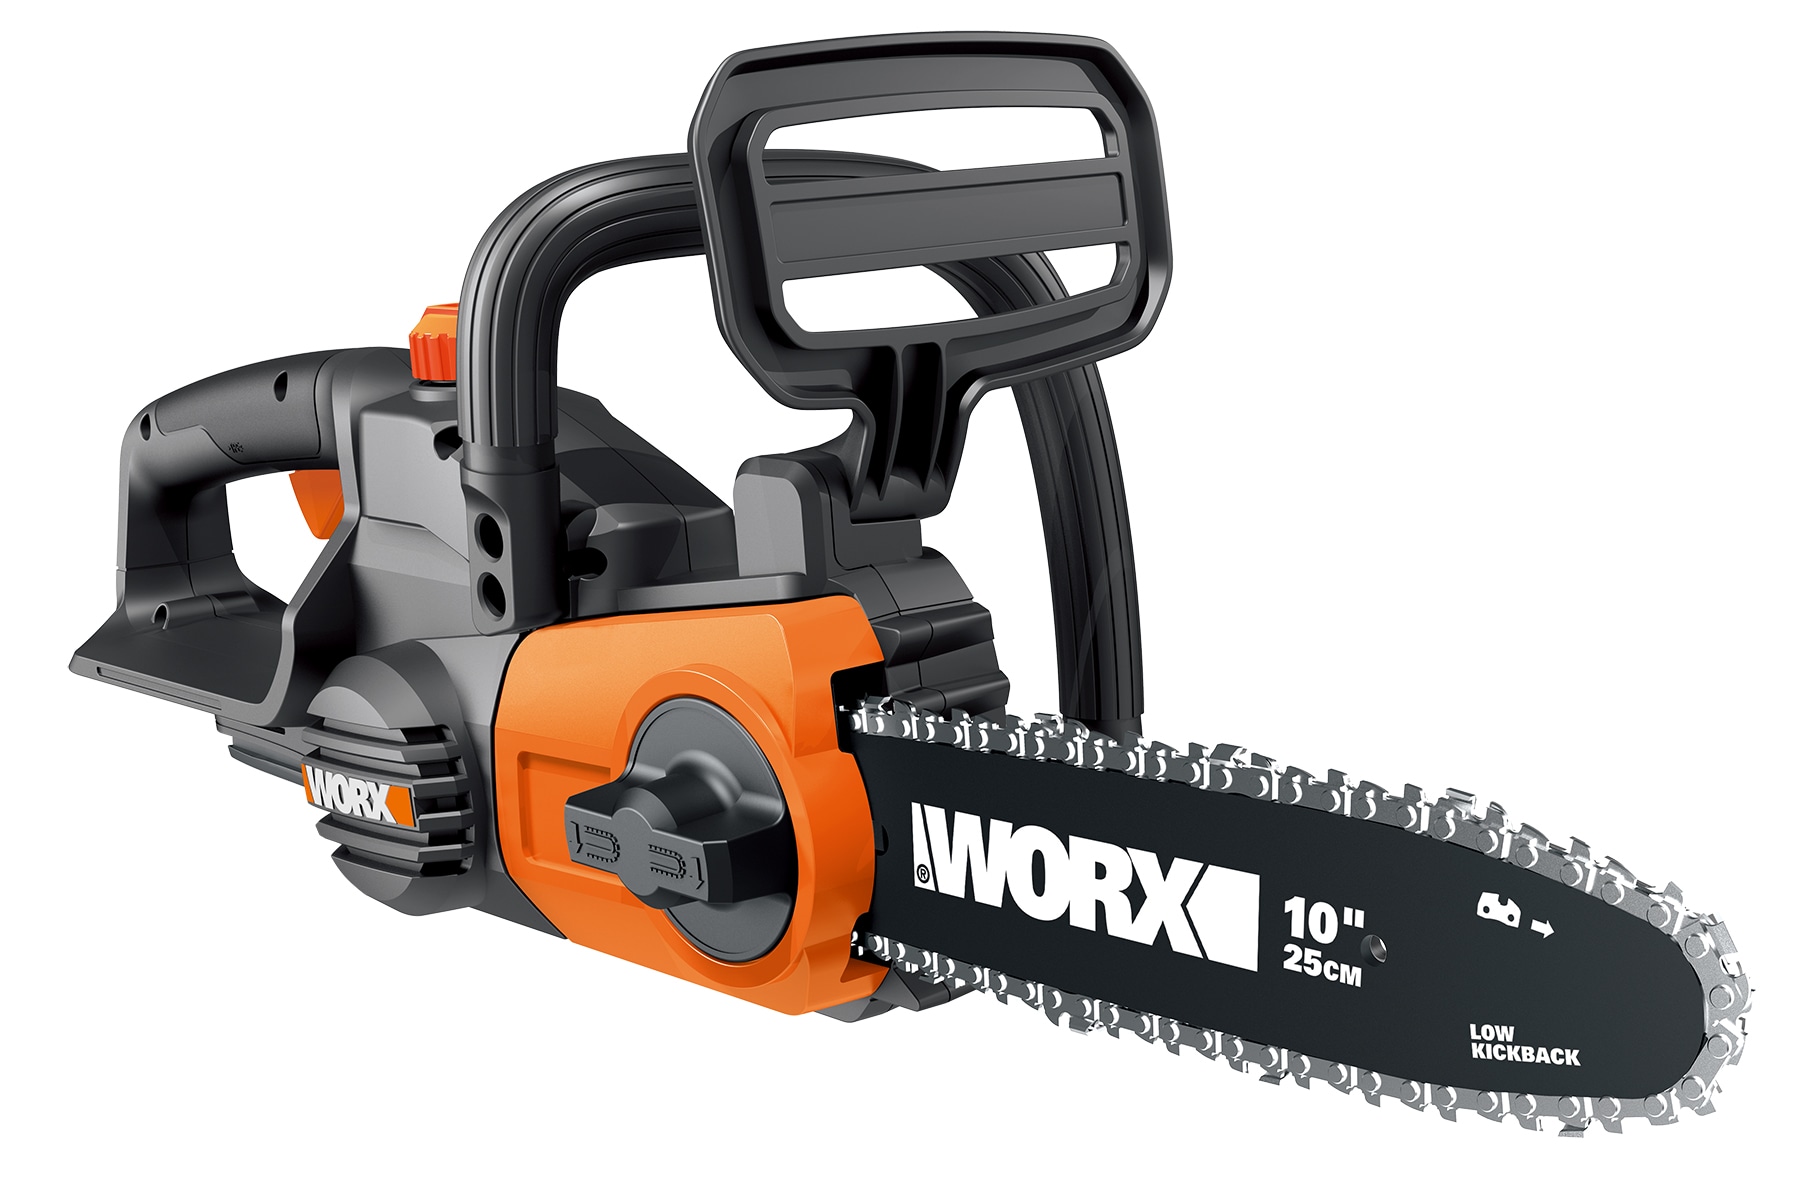 WORX POWER SHARE 40V 12in Cordless Chainsaw w/ Auto Tension 